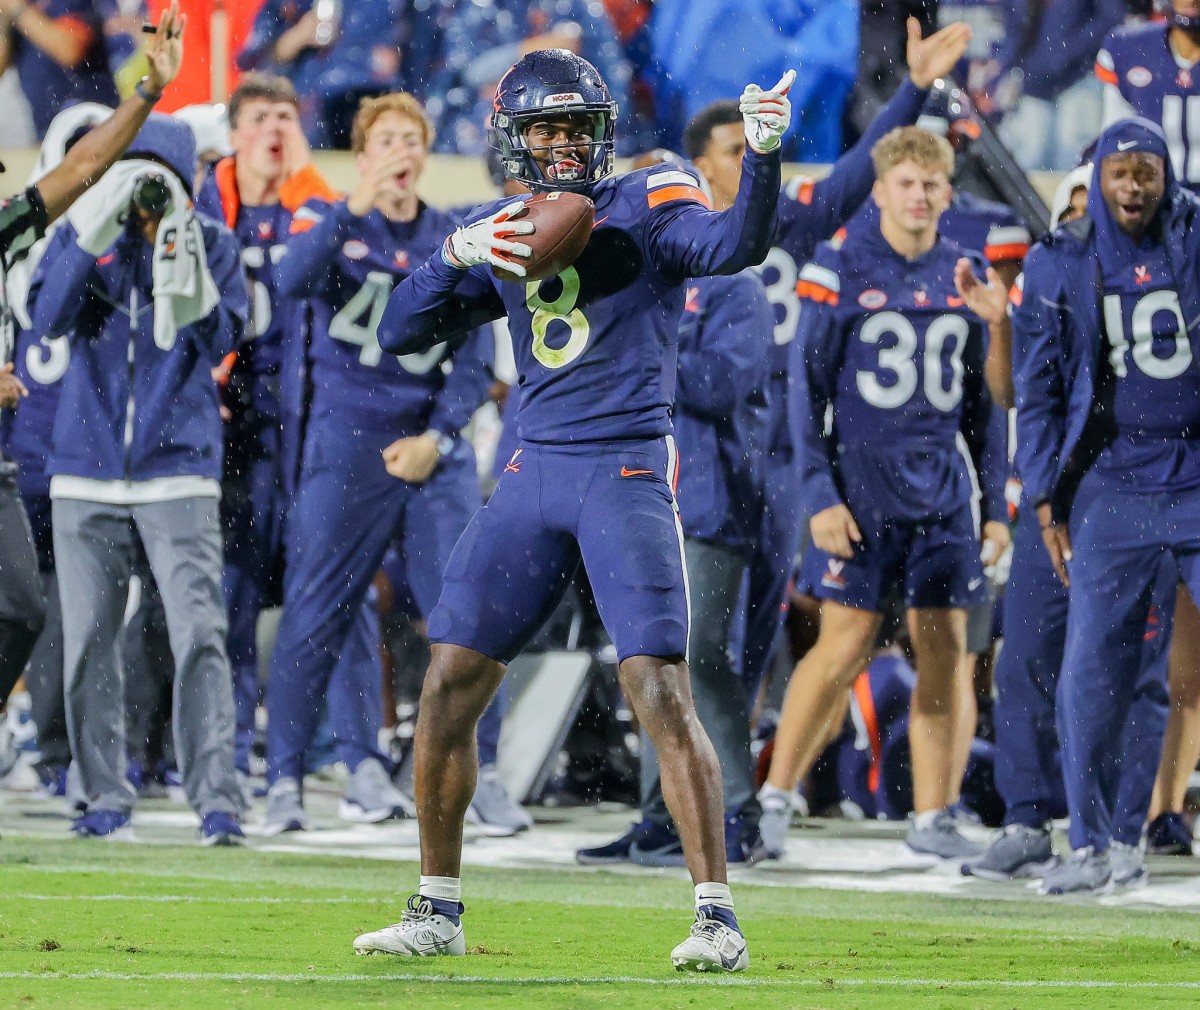 UVA wide receiver Malachi Fields celebrates after making a catch during the Virginia football game against NC State at Scott Stadium.